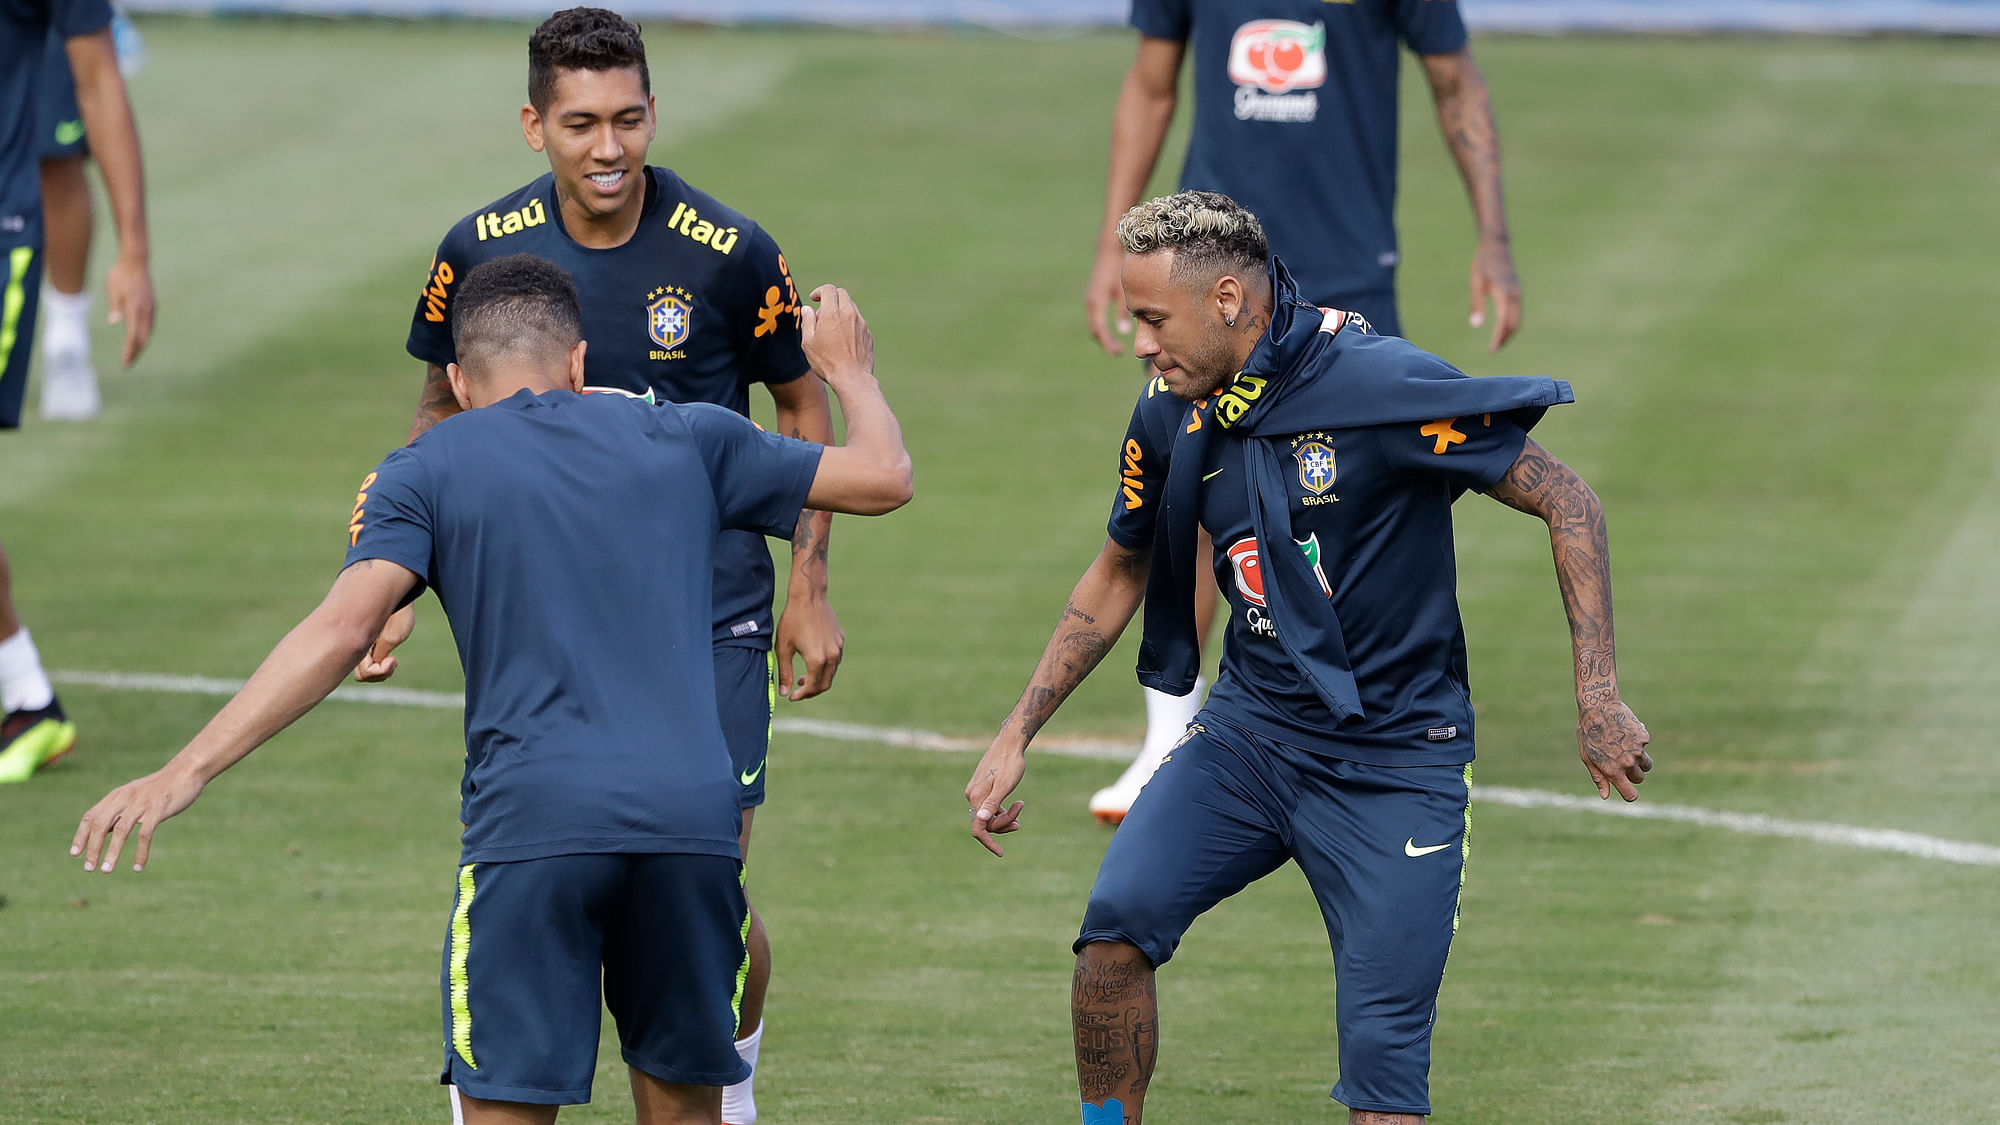 Brazil’s Neymar practices during a training session in Sochi, Russia, Tuesday, June 19, 2018. Brazil will face Costa Rica on June 22 in the group E for the soccer World Cup.&nbsp;